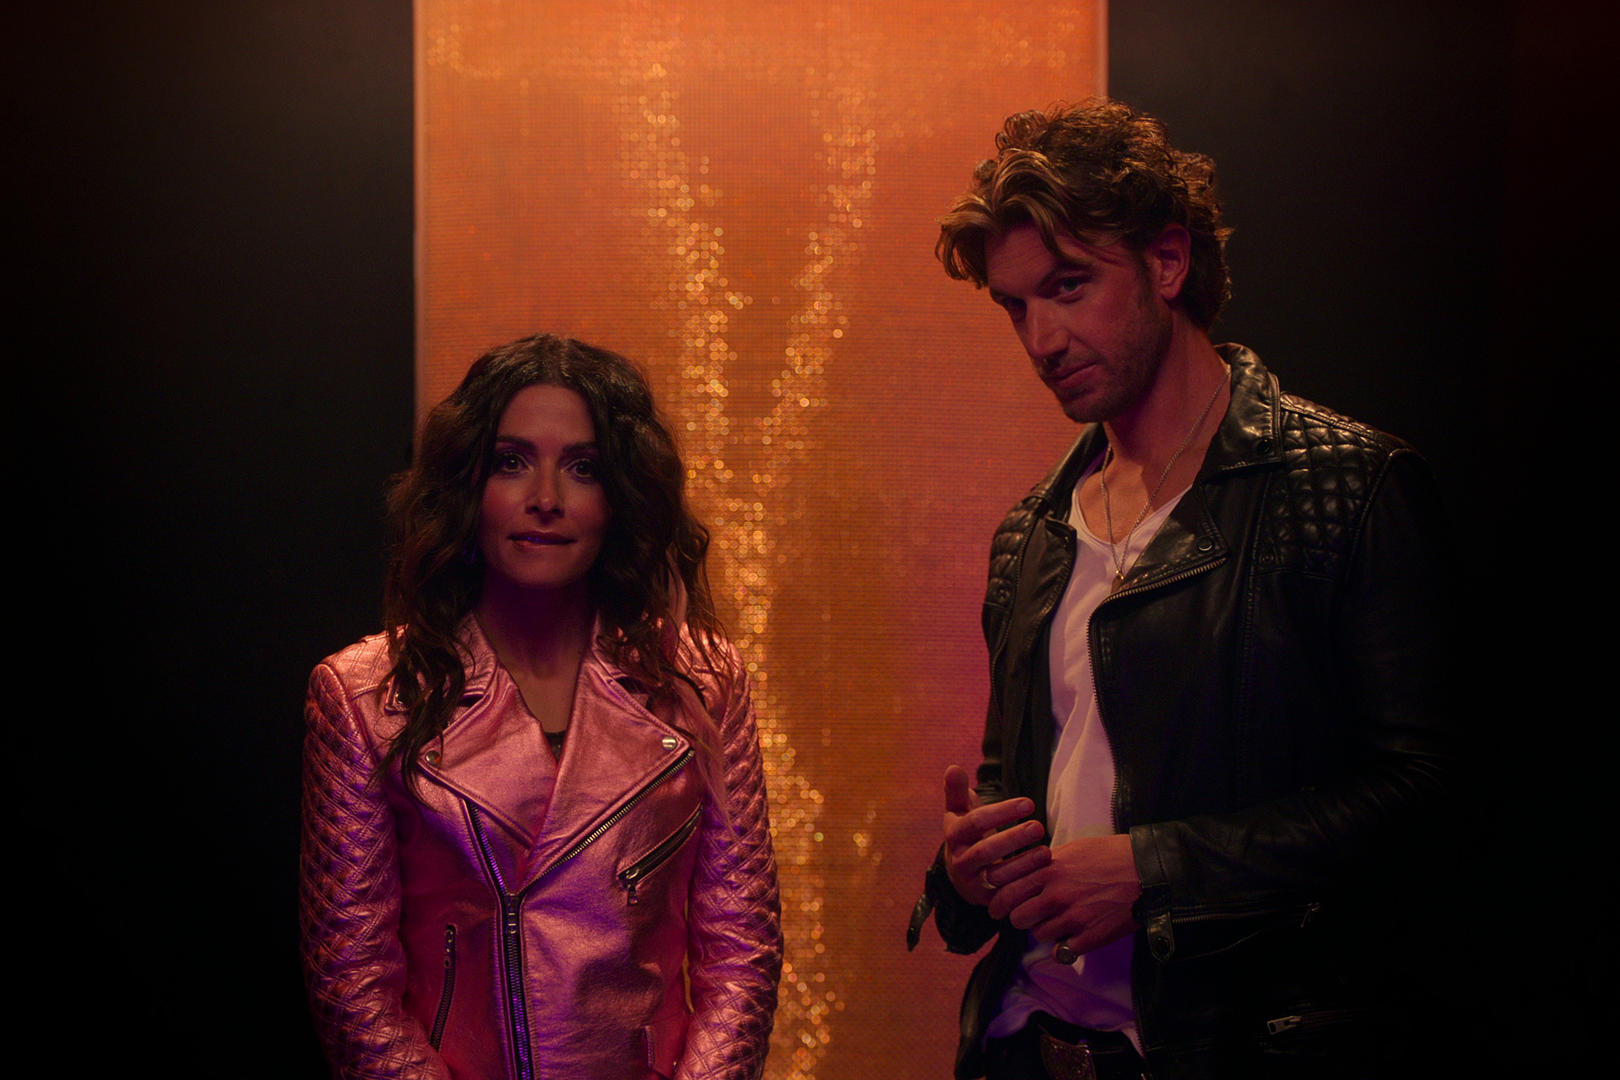 Sex/Life Trailer Sarah Shahi Dreams Of Her Wild Past In Netflixs Latest Drama Series pic